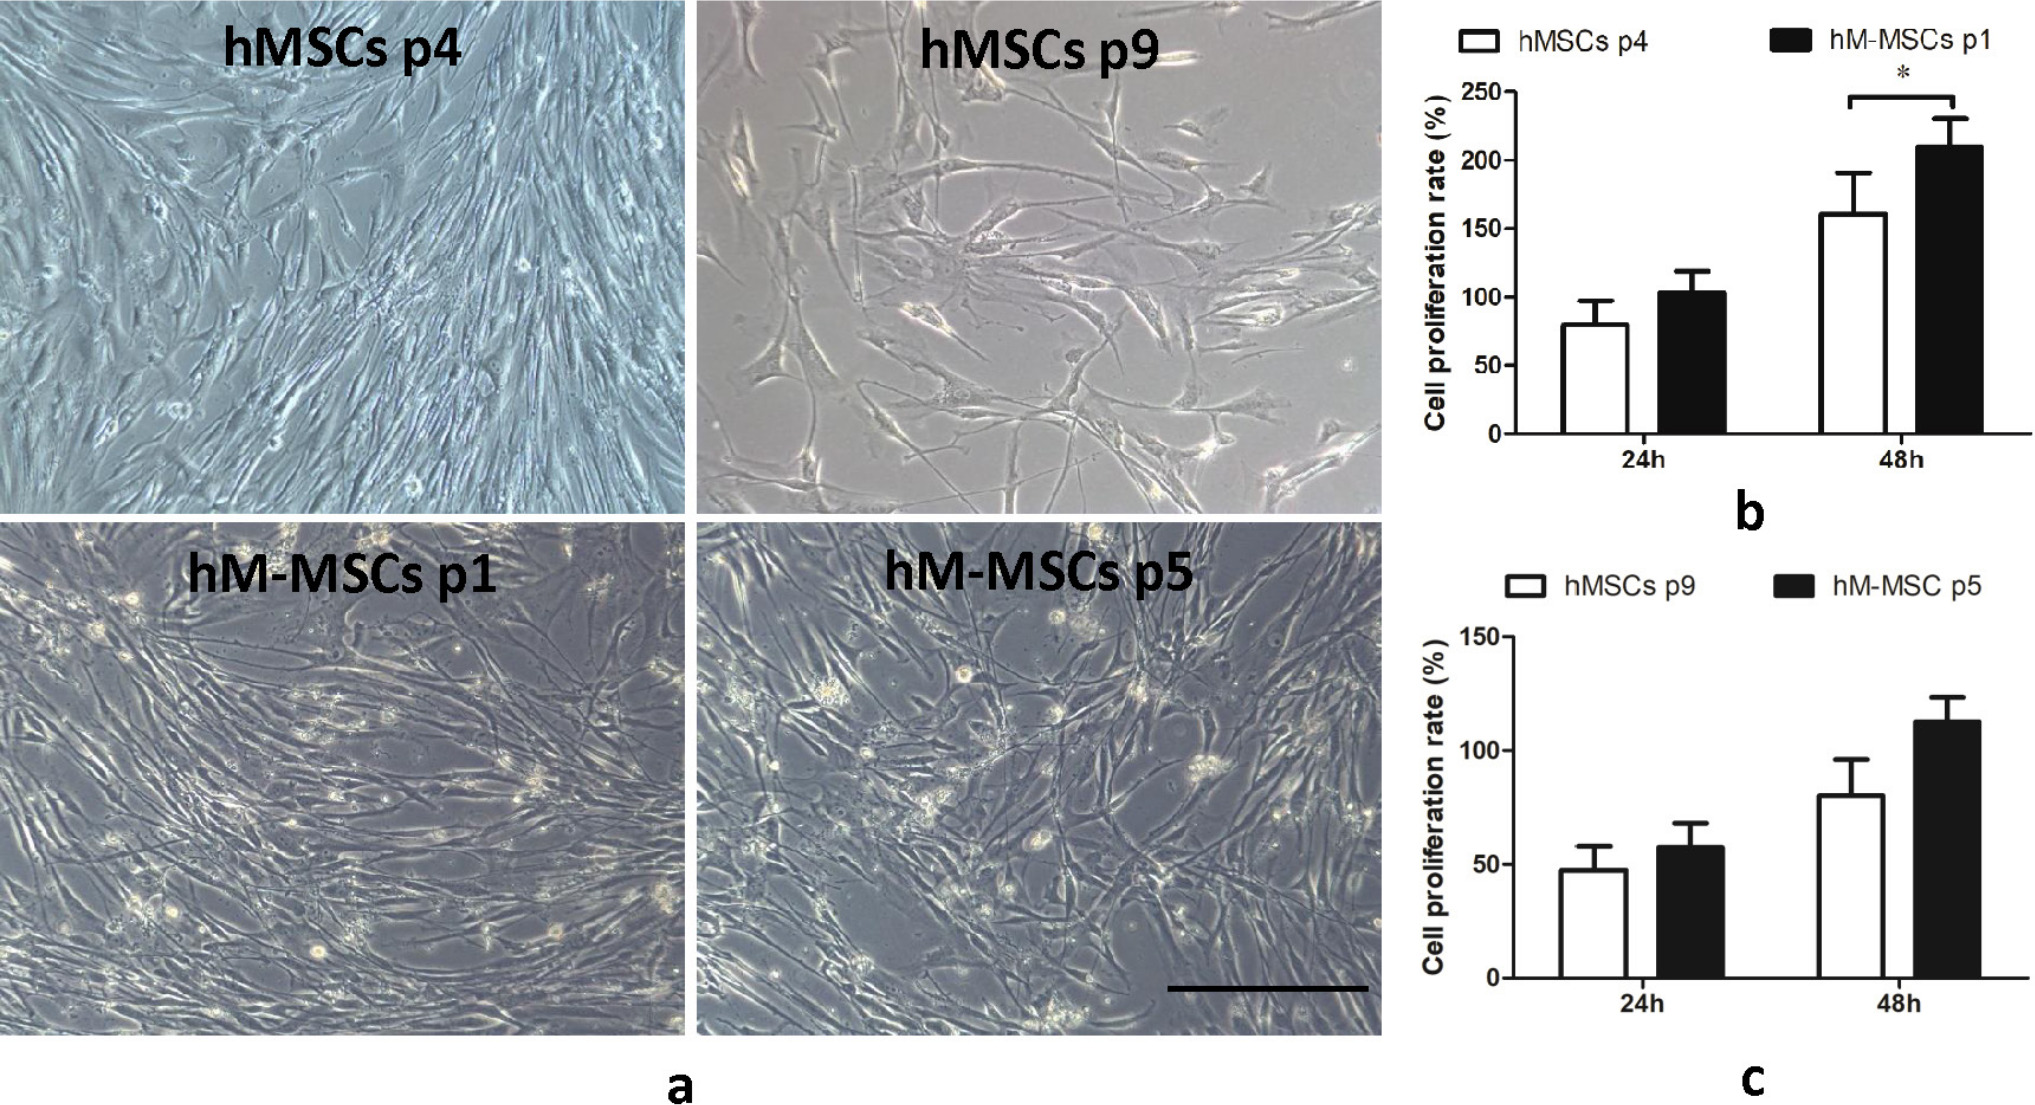 Fig. 1 
            Cell morphology and proliferation of manipulated human mesenchymal stem cells (hM-MSCs) and their untreated human mesenchymal stem cells (hMSCs) controls. a) Cell morphology of hM-MSCs (passage 1 or 5) and their untreated hMSCs controls (passage 4 or passage 9). b) Cell proliferation rate of hM-MSCs at passage 1 (p1) and their untreated hMSCs controls (hMSCs p4) measured at 24 hours or 48 hours after culture by Bromodeoxyuridine / 5-bromo-2'-deoxyuridine (BrdU) assay. c) Cell proliferation of hM-MSCs at passage 5 (p5) and their untreated hMSCs controls (hMSCs p9) measured at 24 hours or 48 hours after culture by BrdU assay. The representative images shown were derived from the bone marrow of donor 1. The data are expressed as mean and SD (n = 2 donors with three replicates for each donor). *p < 0.05 versus human mesenchymal stem cells (MSCs) controls. Scale bar: 50 μm.
          